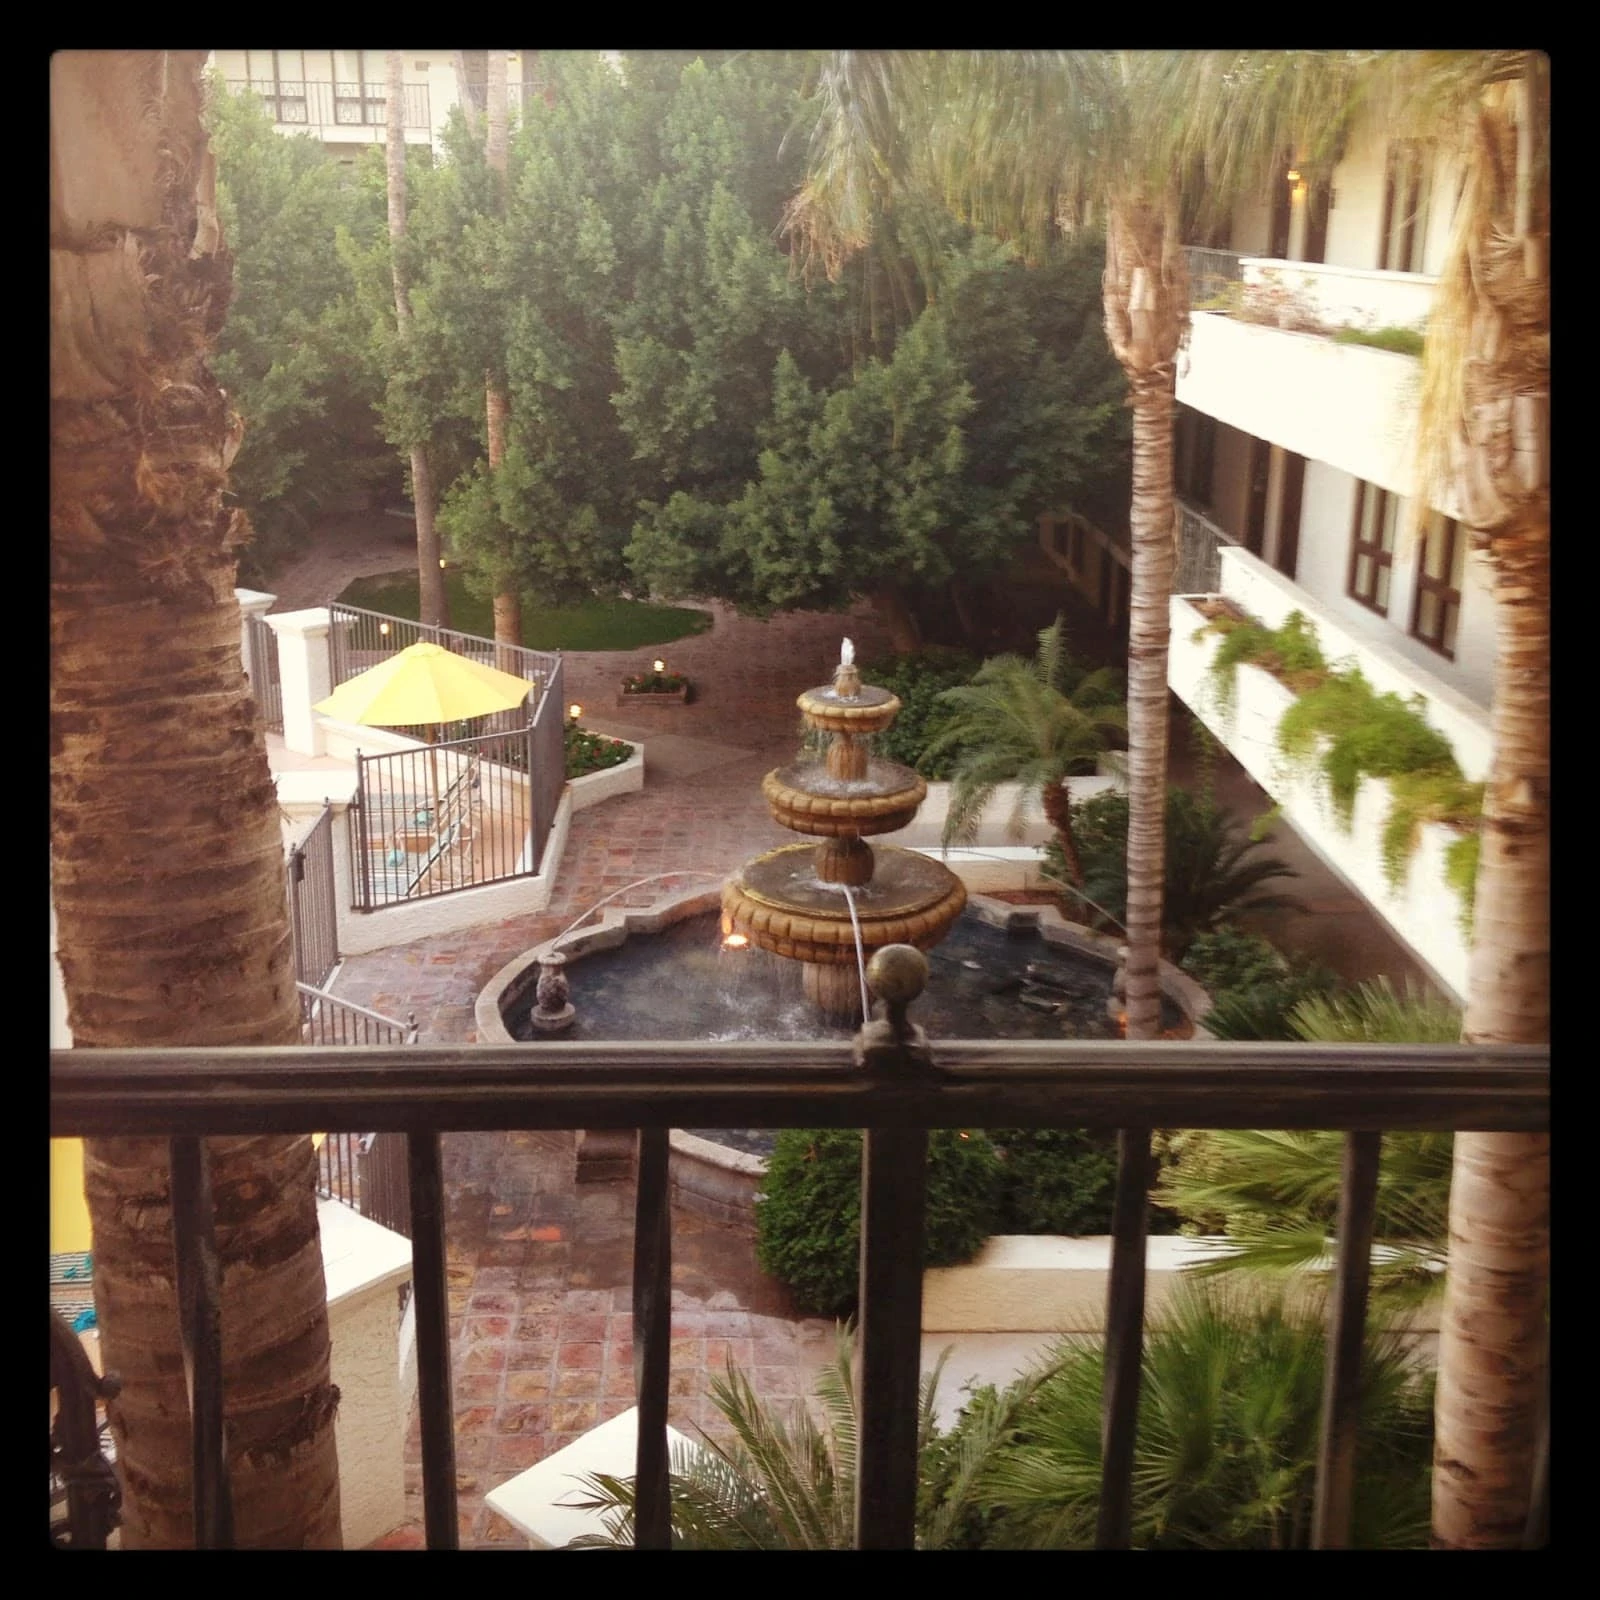 The courtyard of the hotel with a fountain in the middle.